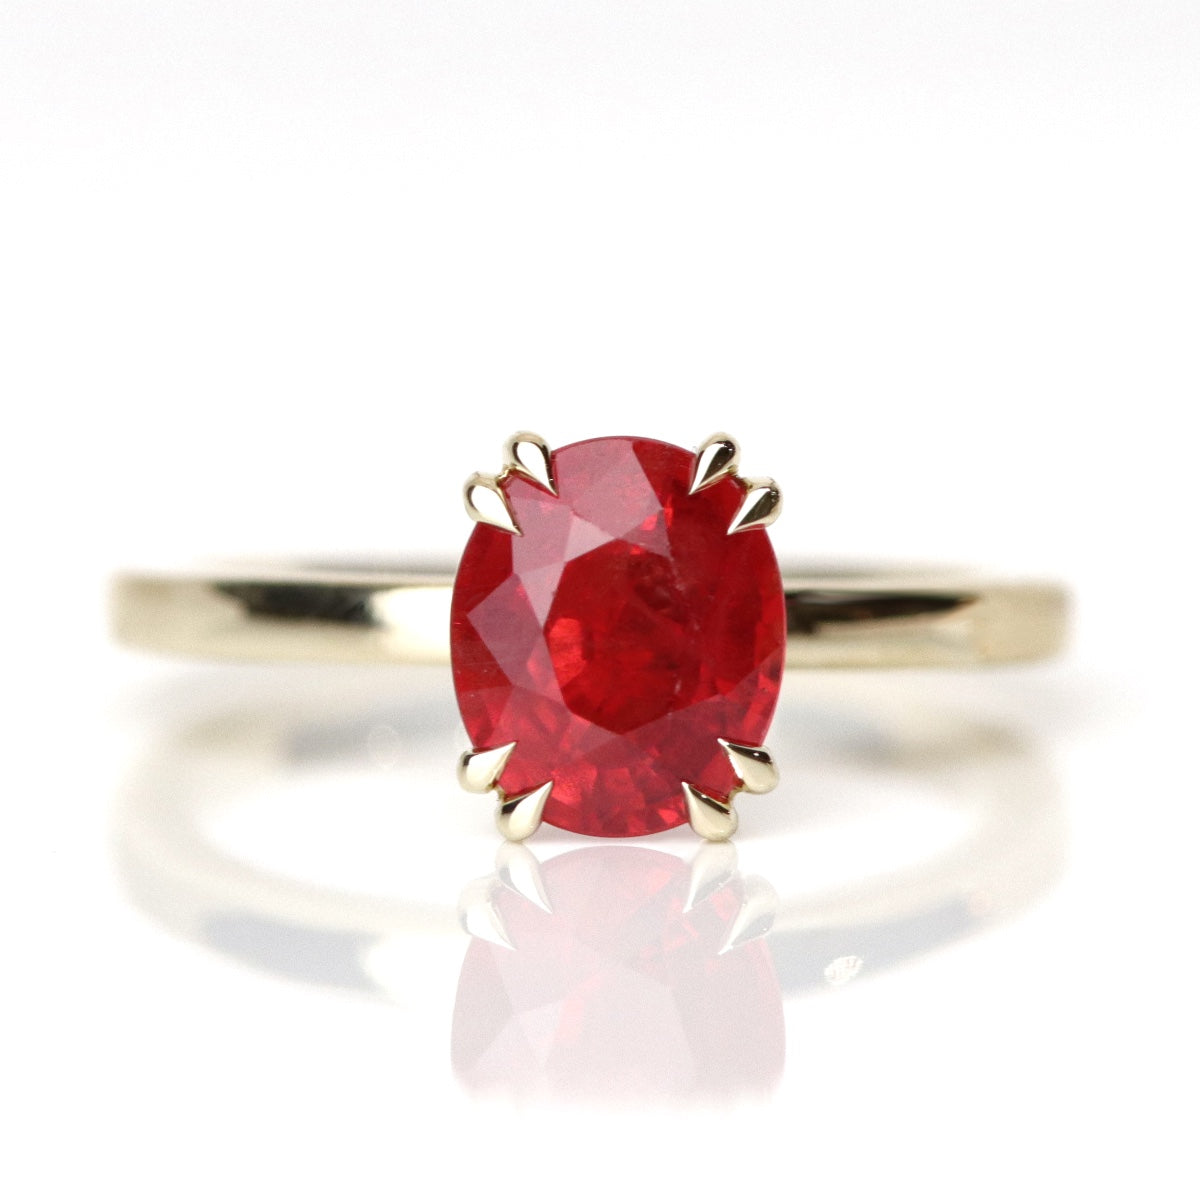 The Francisca Ring (Oval)